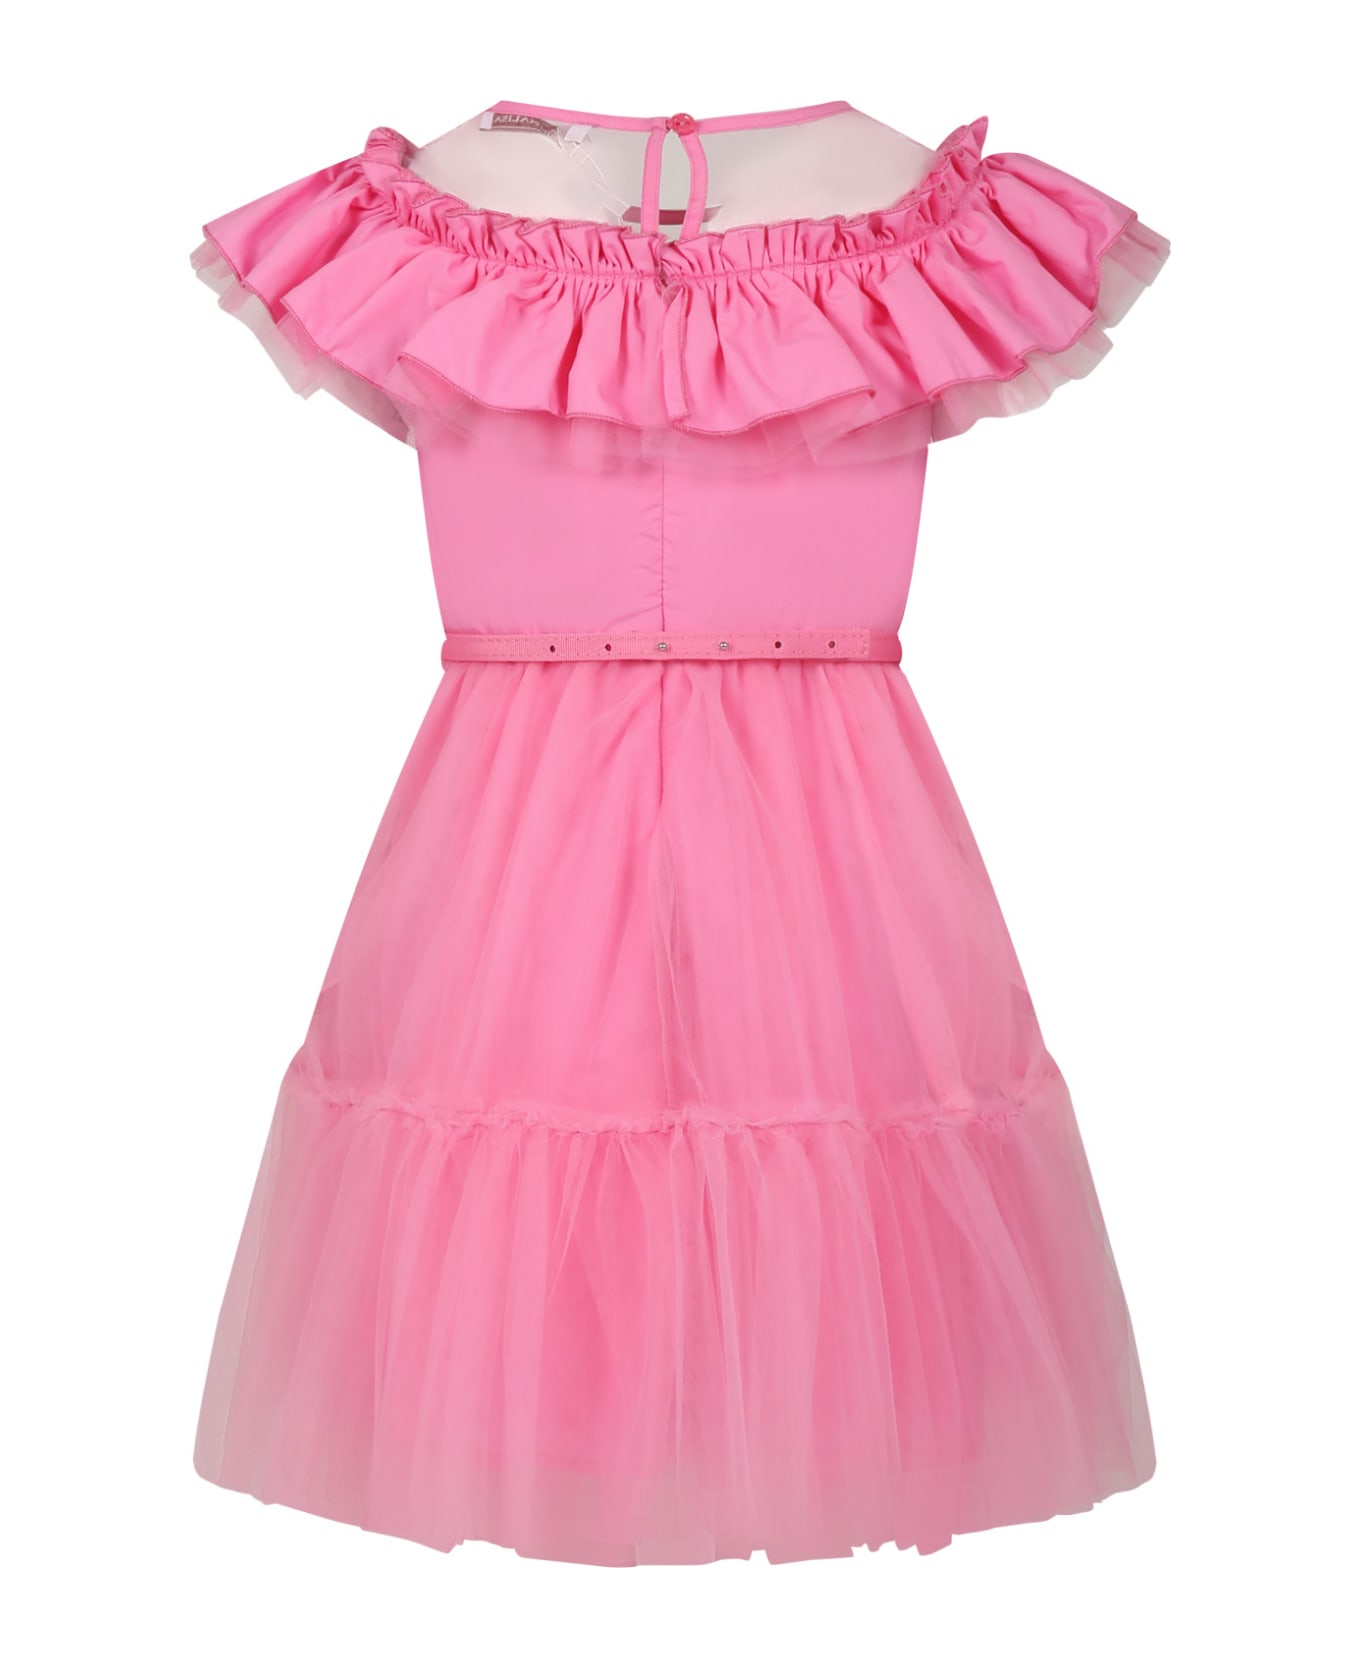 Monnalisa Pink Dress For Girl With Tulle And Ruffles - Pink ワンピース＆ドレス